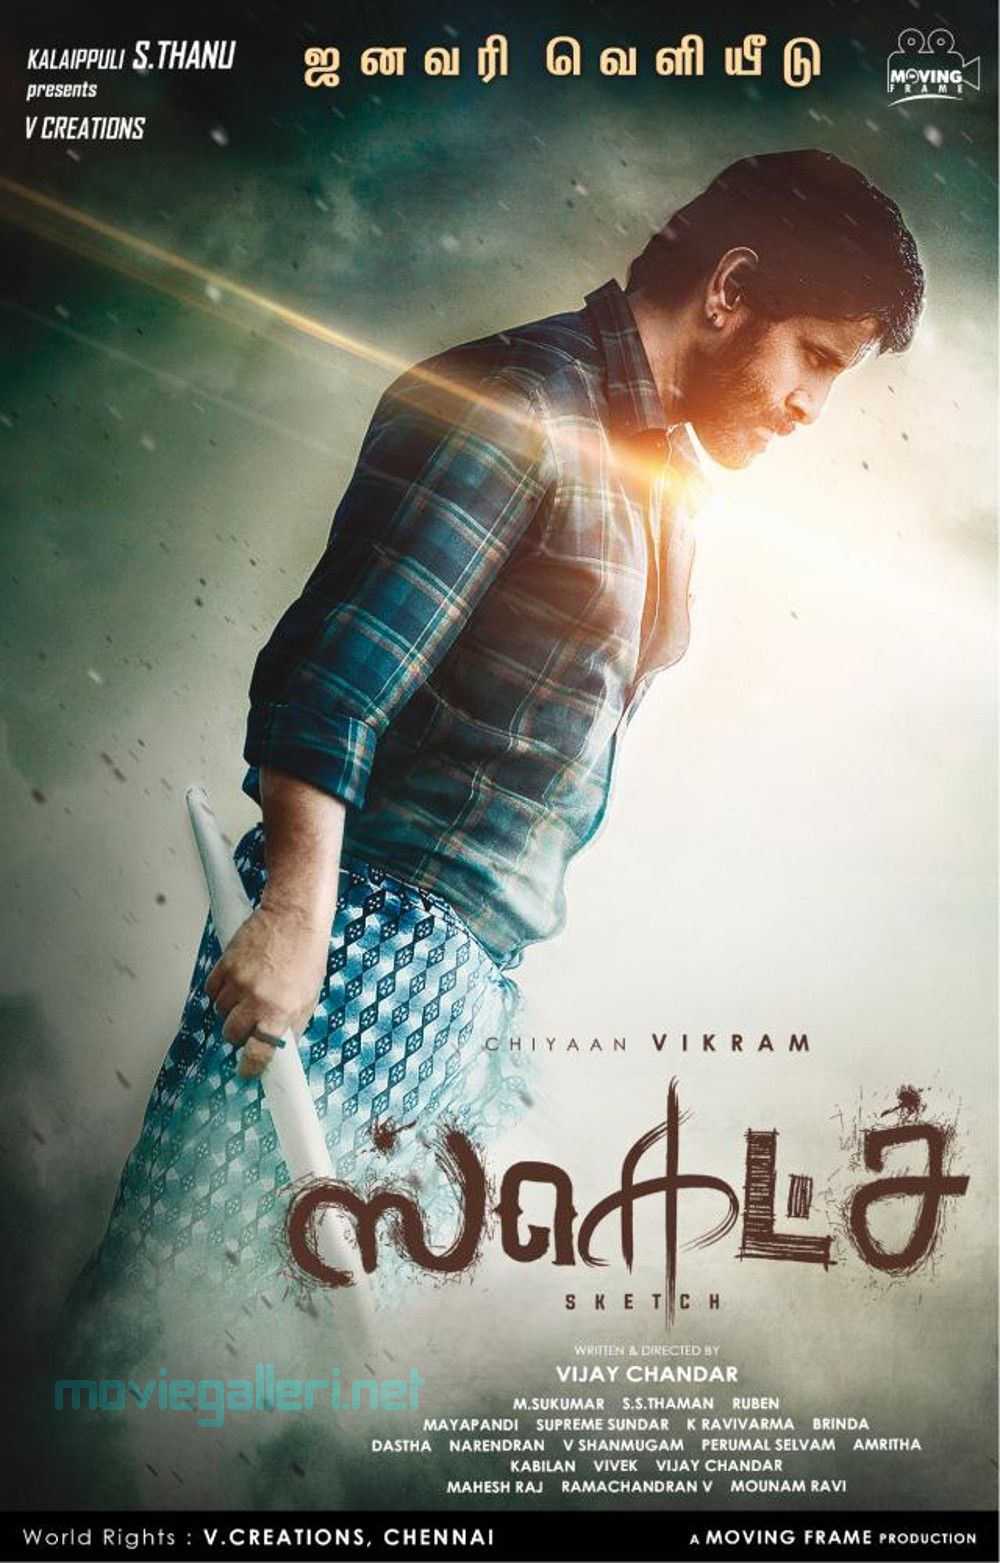 Vikram Sketch Movie Release January 2018 Poster. New Movie Posters